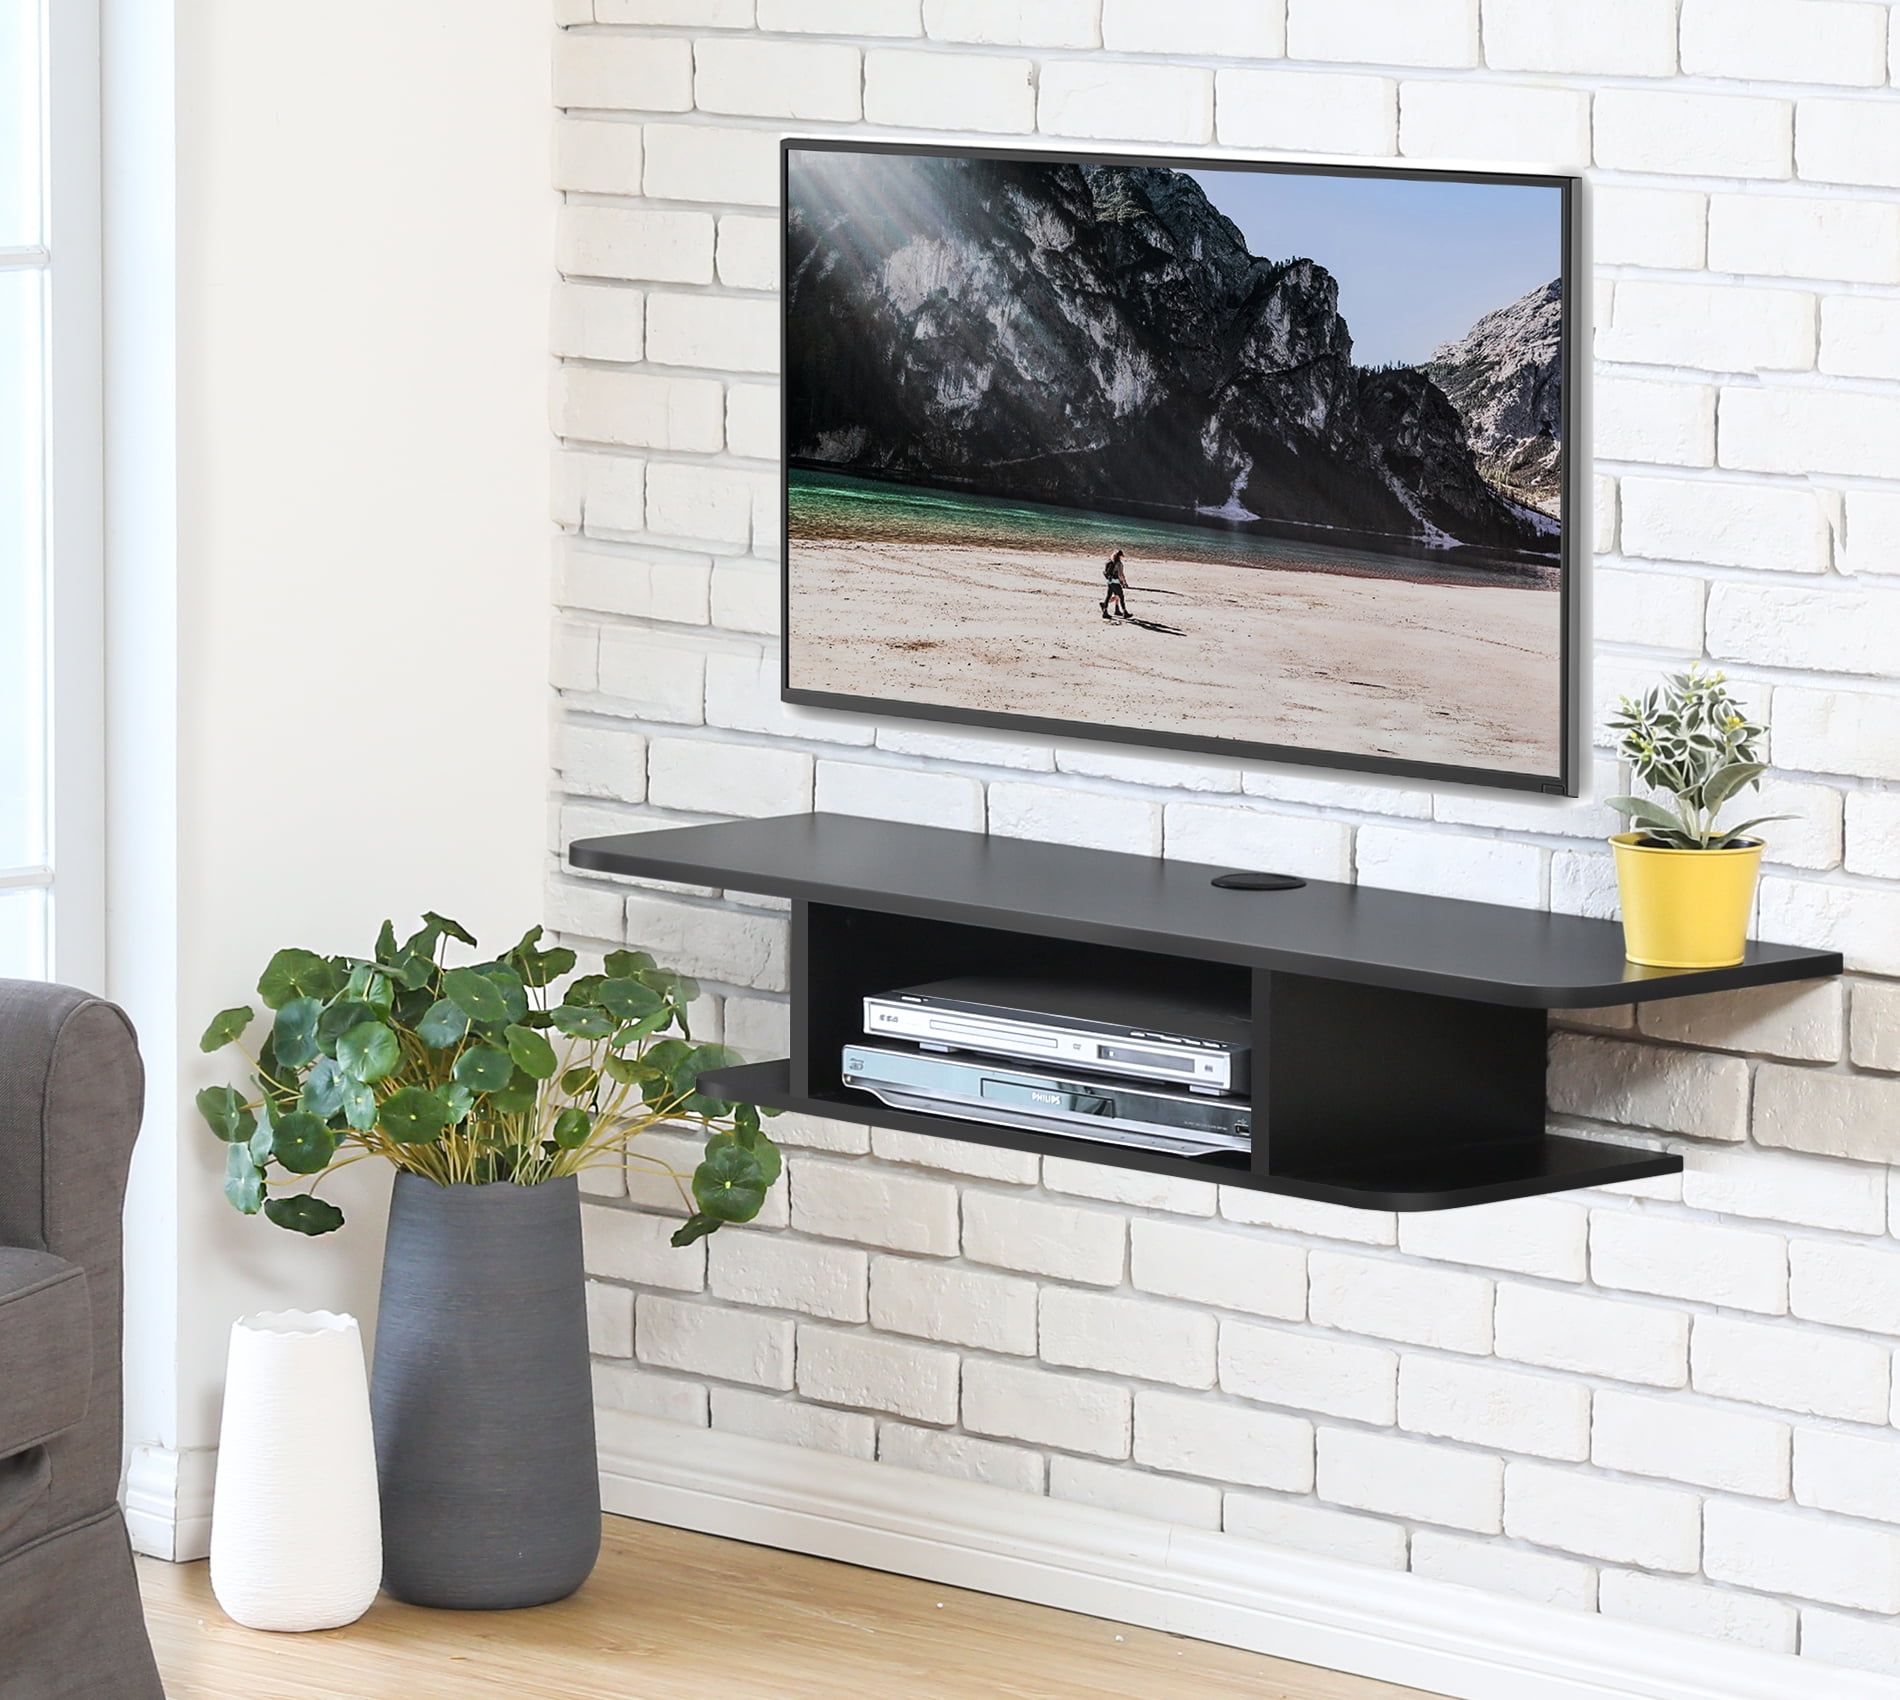 Fitueyes Wall Mounted Media Console,floating Tv Stand Component Shelf Throughout Top Shelf Mount Tv Stands (Gallery 18 of 20)